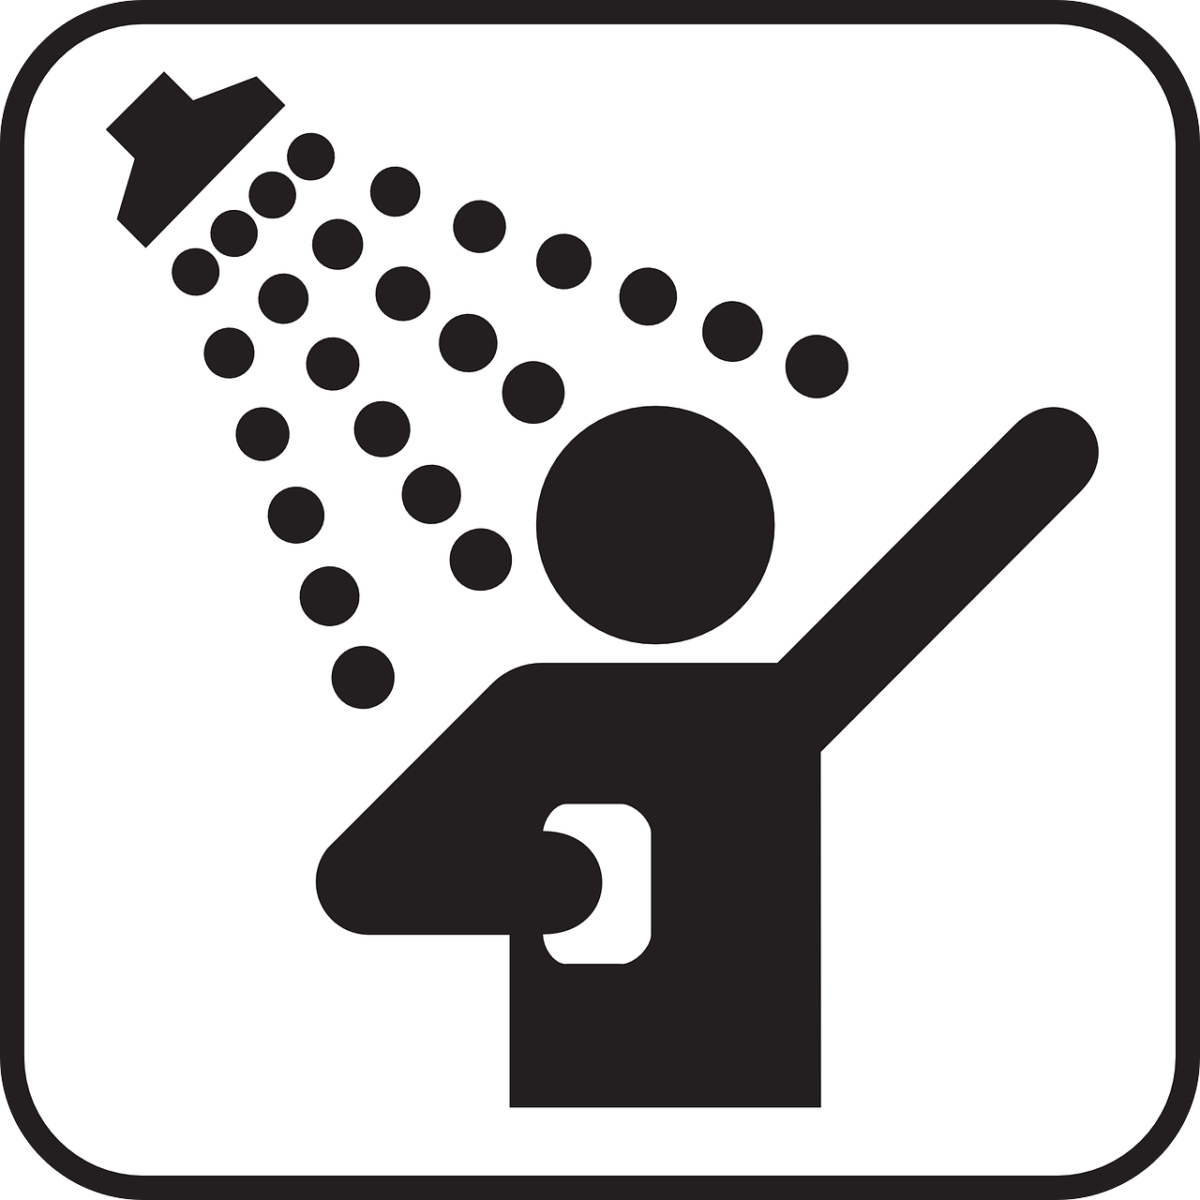 Black and white graphic of someone showering.